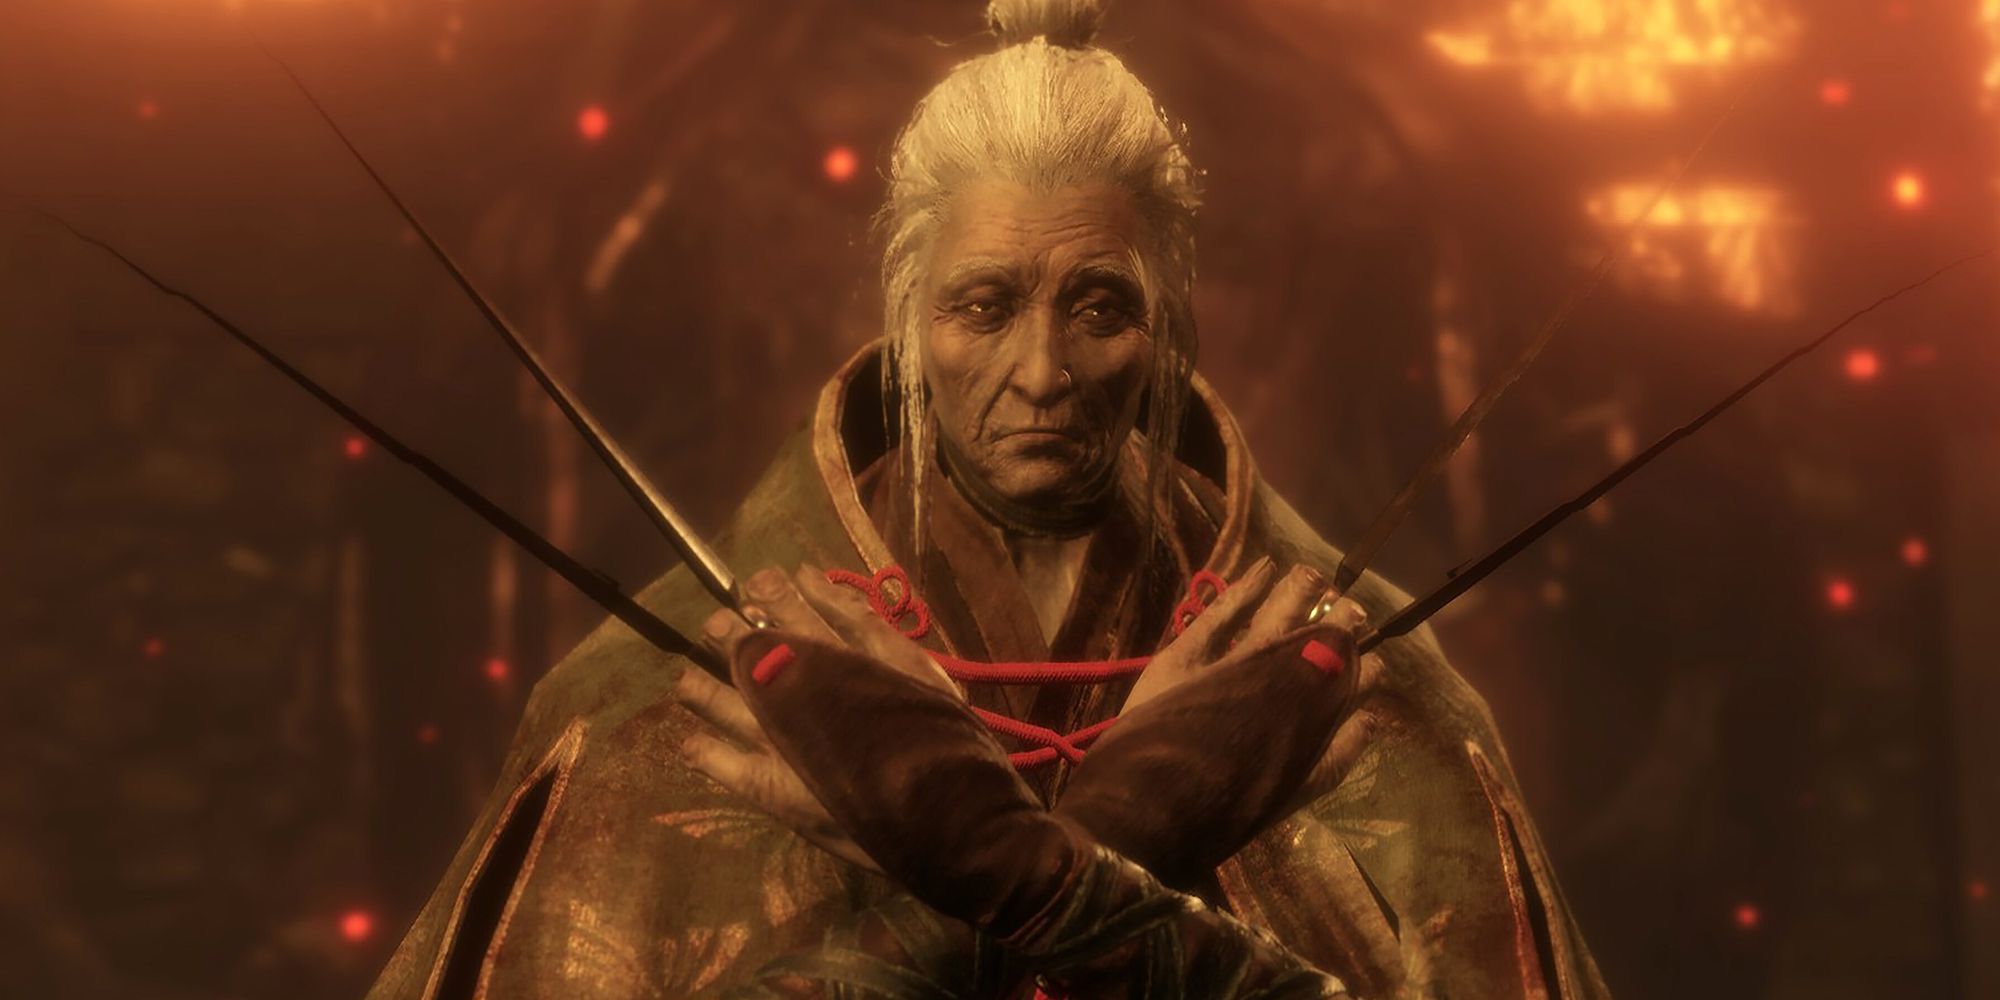 Sekiro Shadows Die Twice - Lady Butterfly Looking Very Deadpan With Weapons Drawn